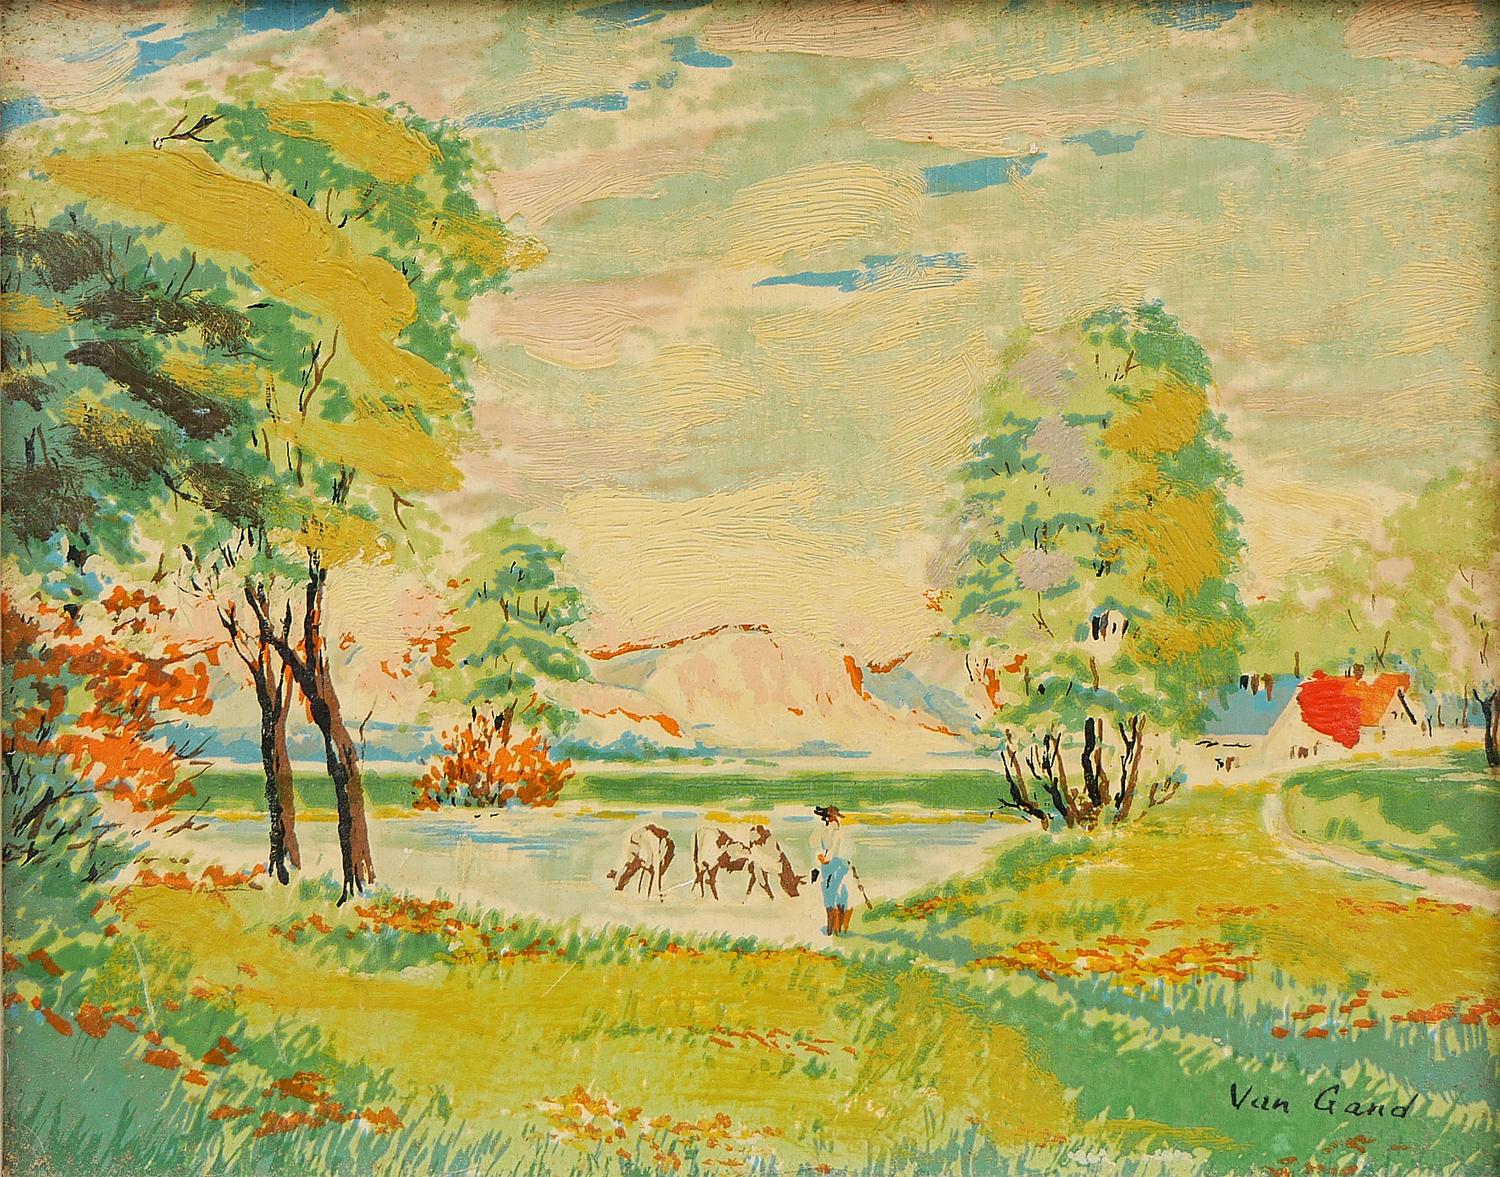 Yellow and Green-Toned Post Impressionist Belgian Countryside Landscape Painting 7